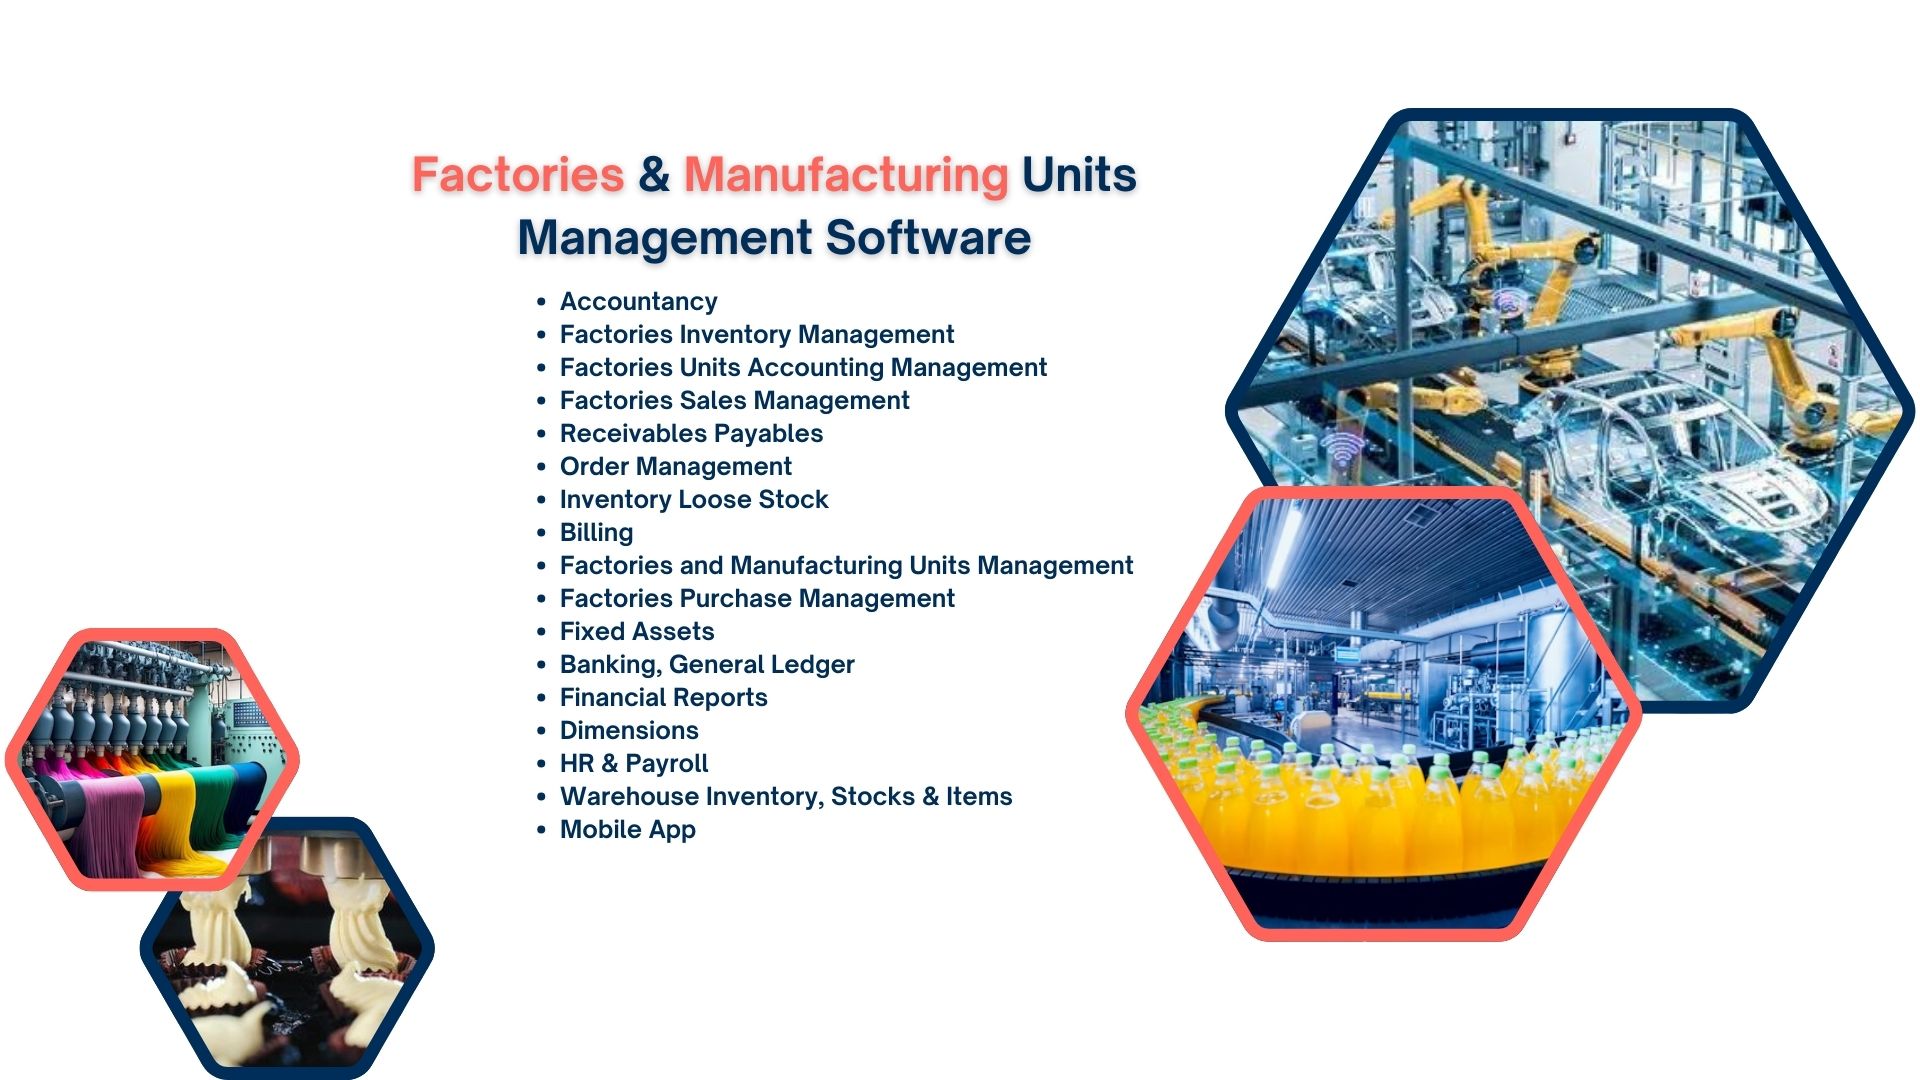 Factories and Manufacturing Units Management software